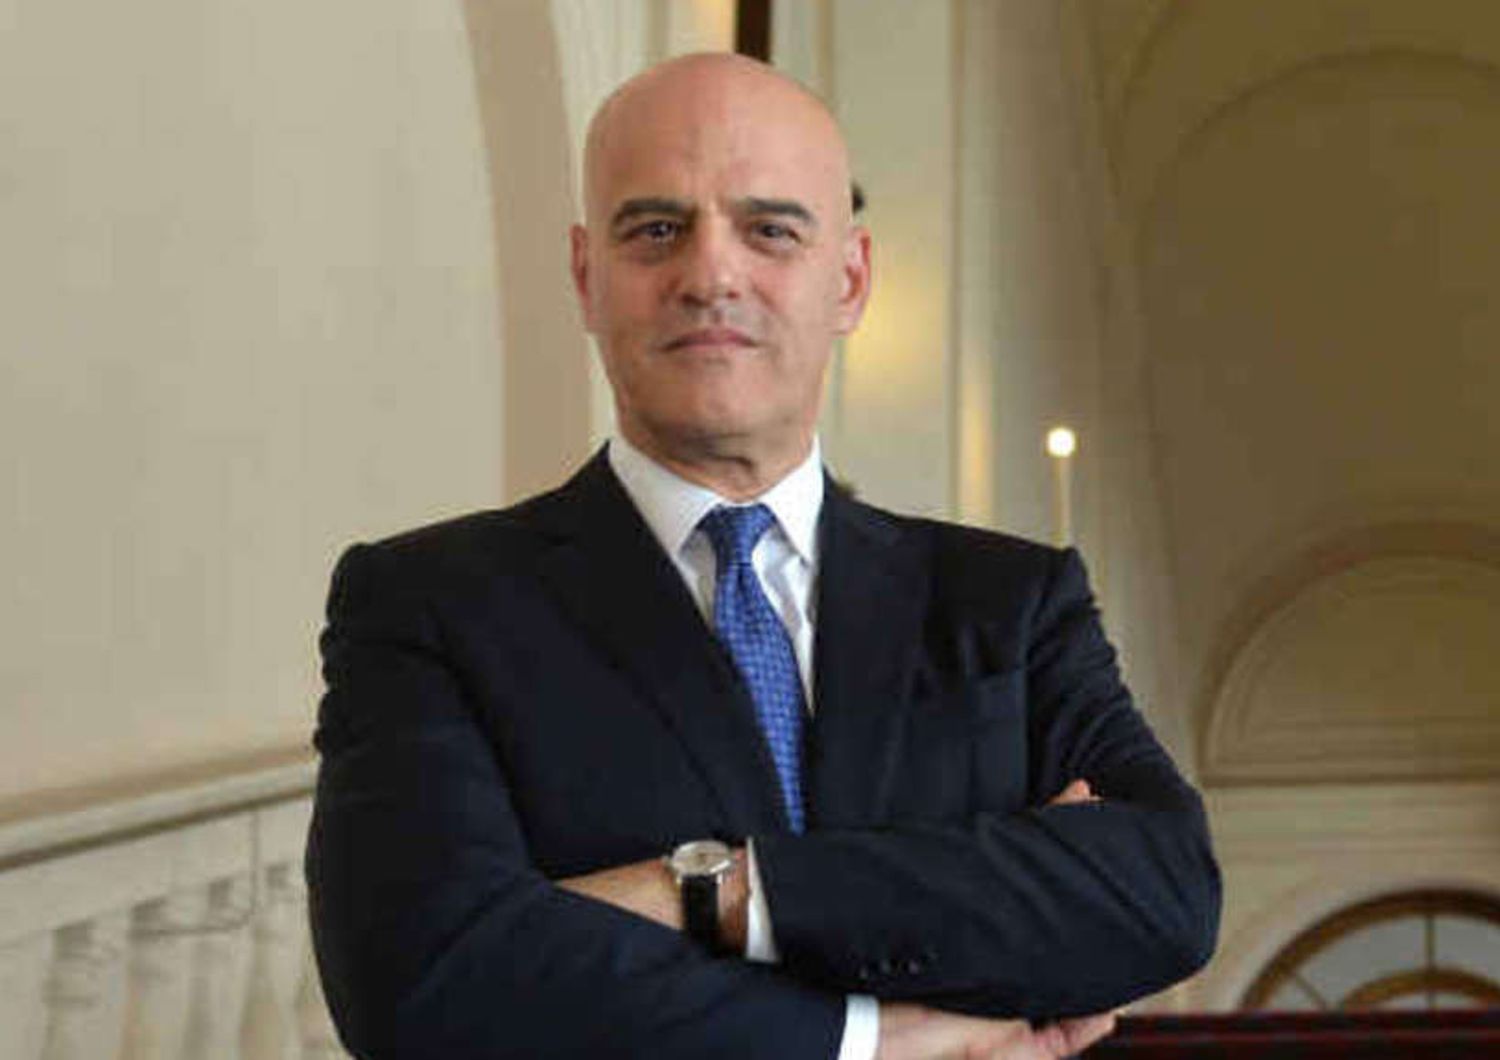 Oil multinational Eni not worried by low prices, says CEO